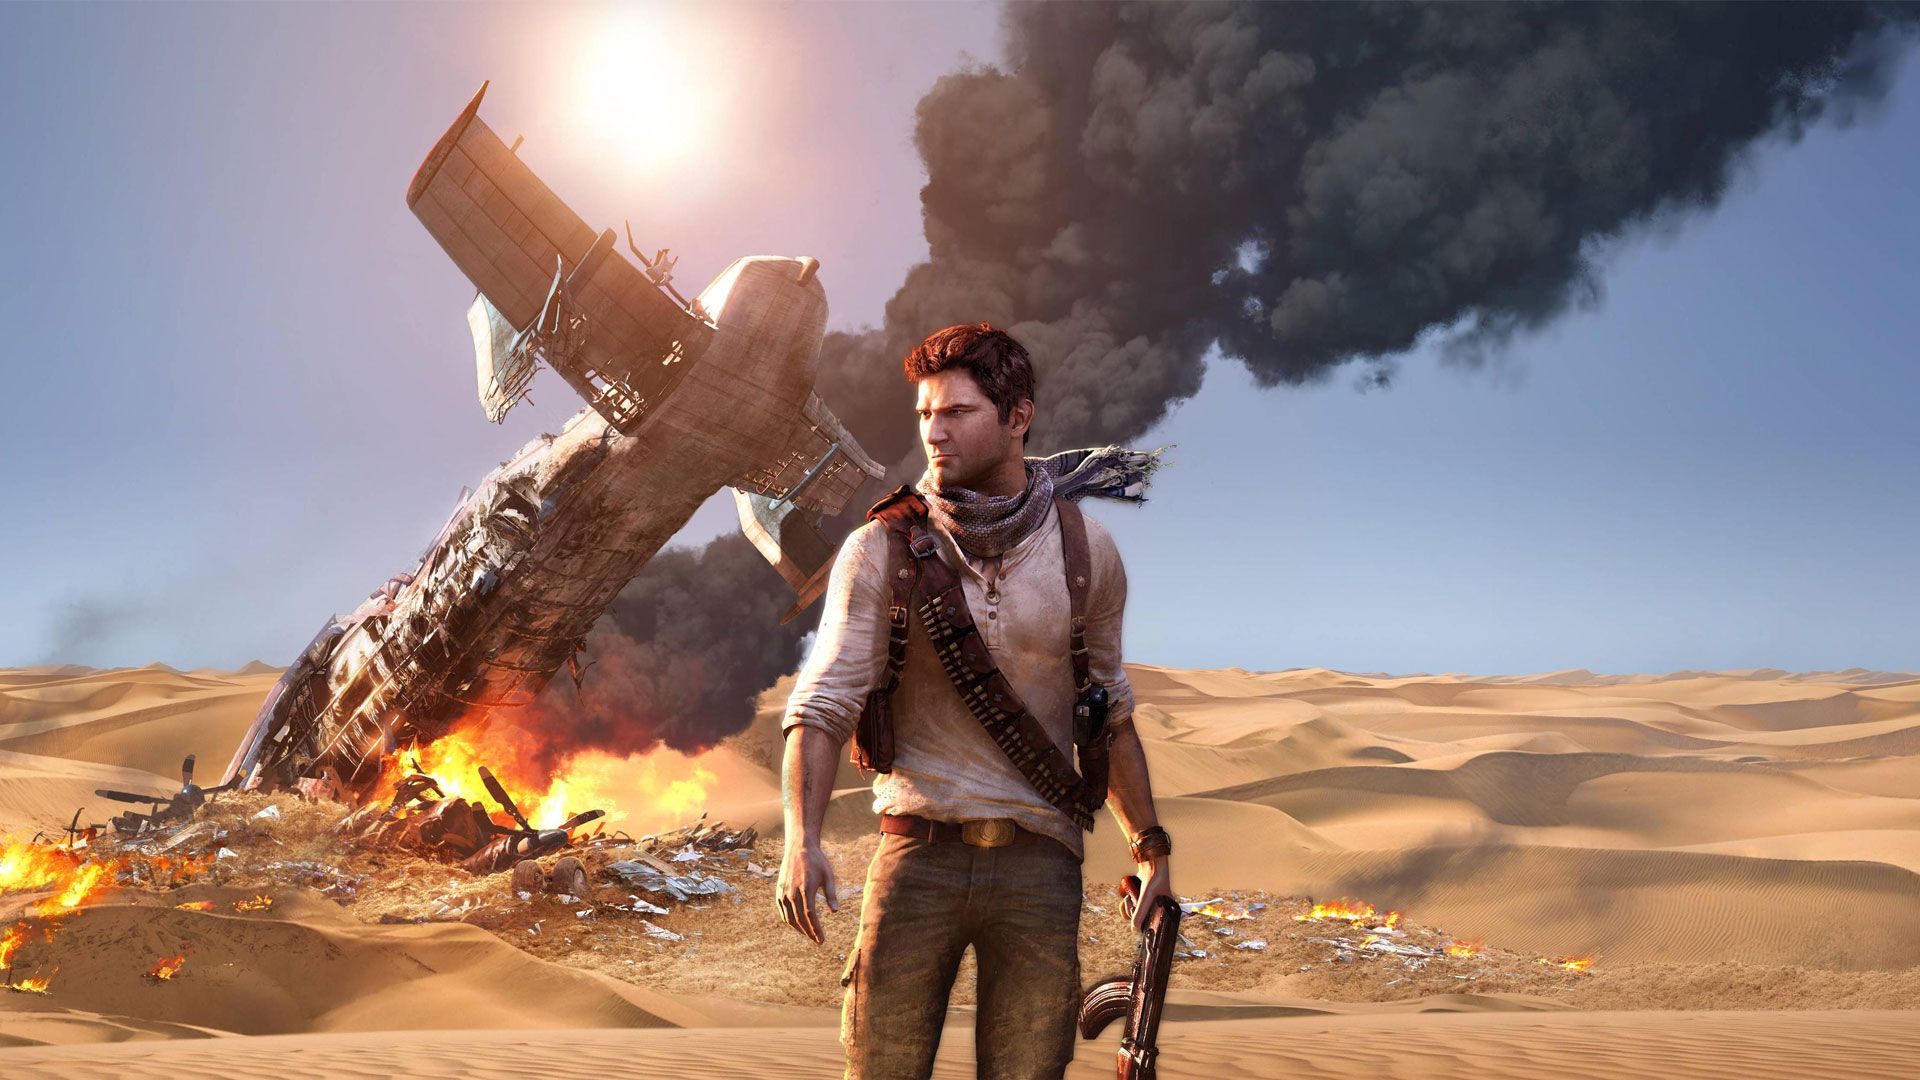 How to Download Uncharted 3 F2P From PS Store 